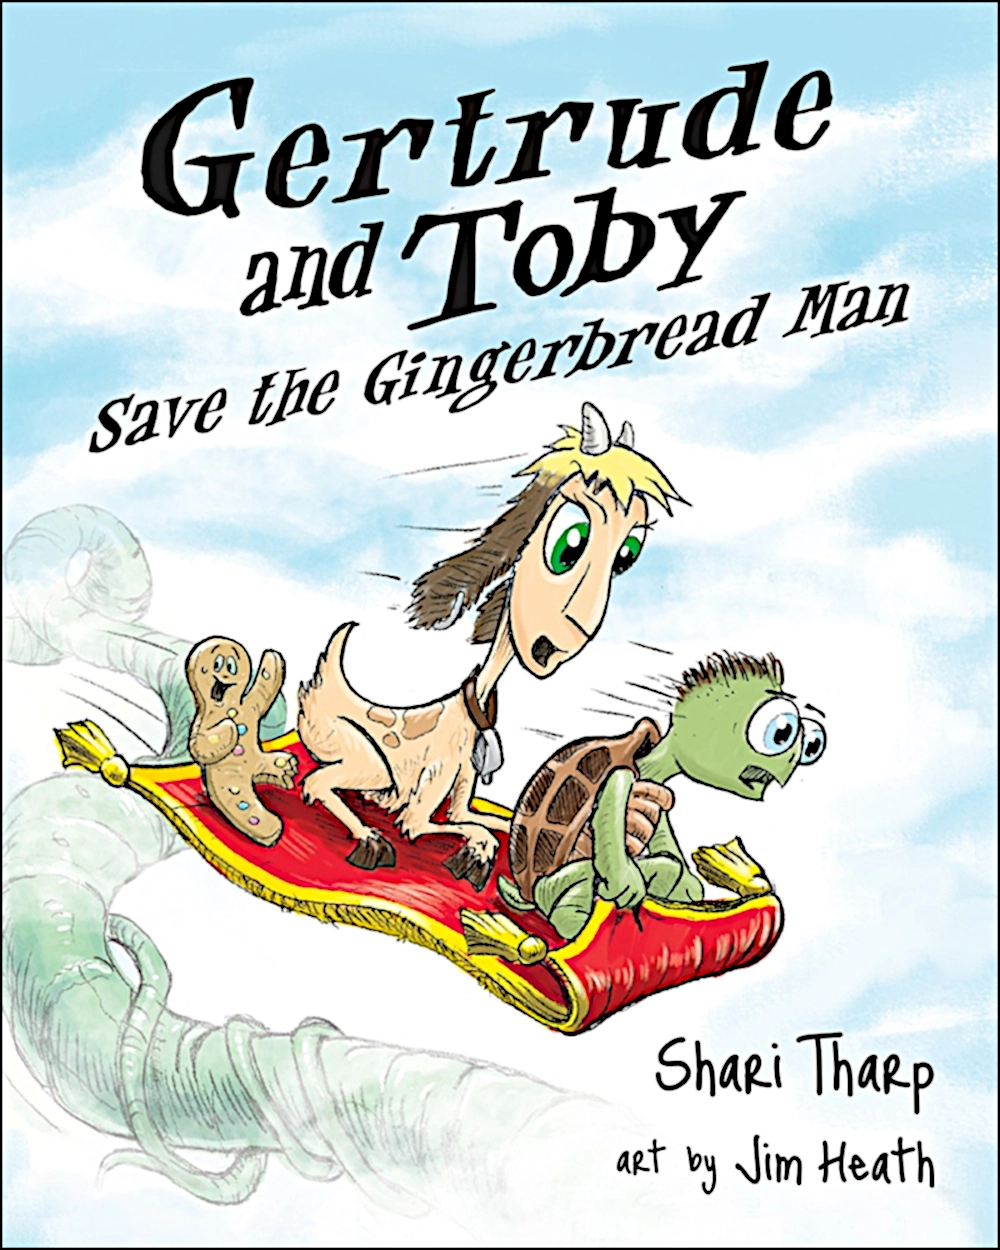 Cover image of Gertrude and Toby Save the Gingerbread Man, book 2 in the three-book Gertrude and Toby Adventure Series.